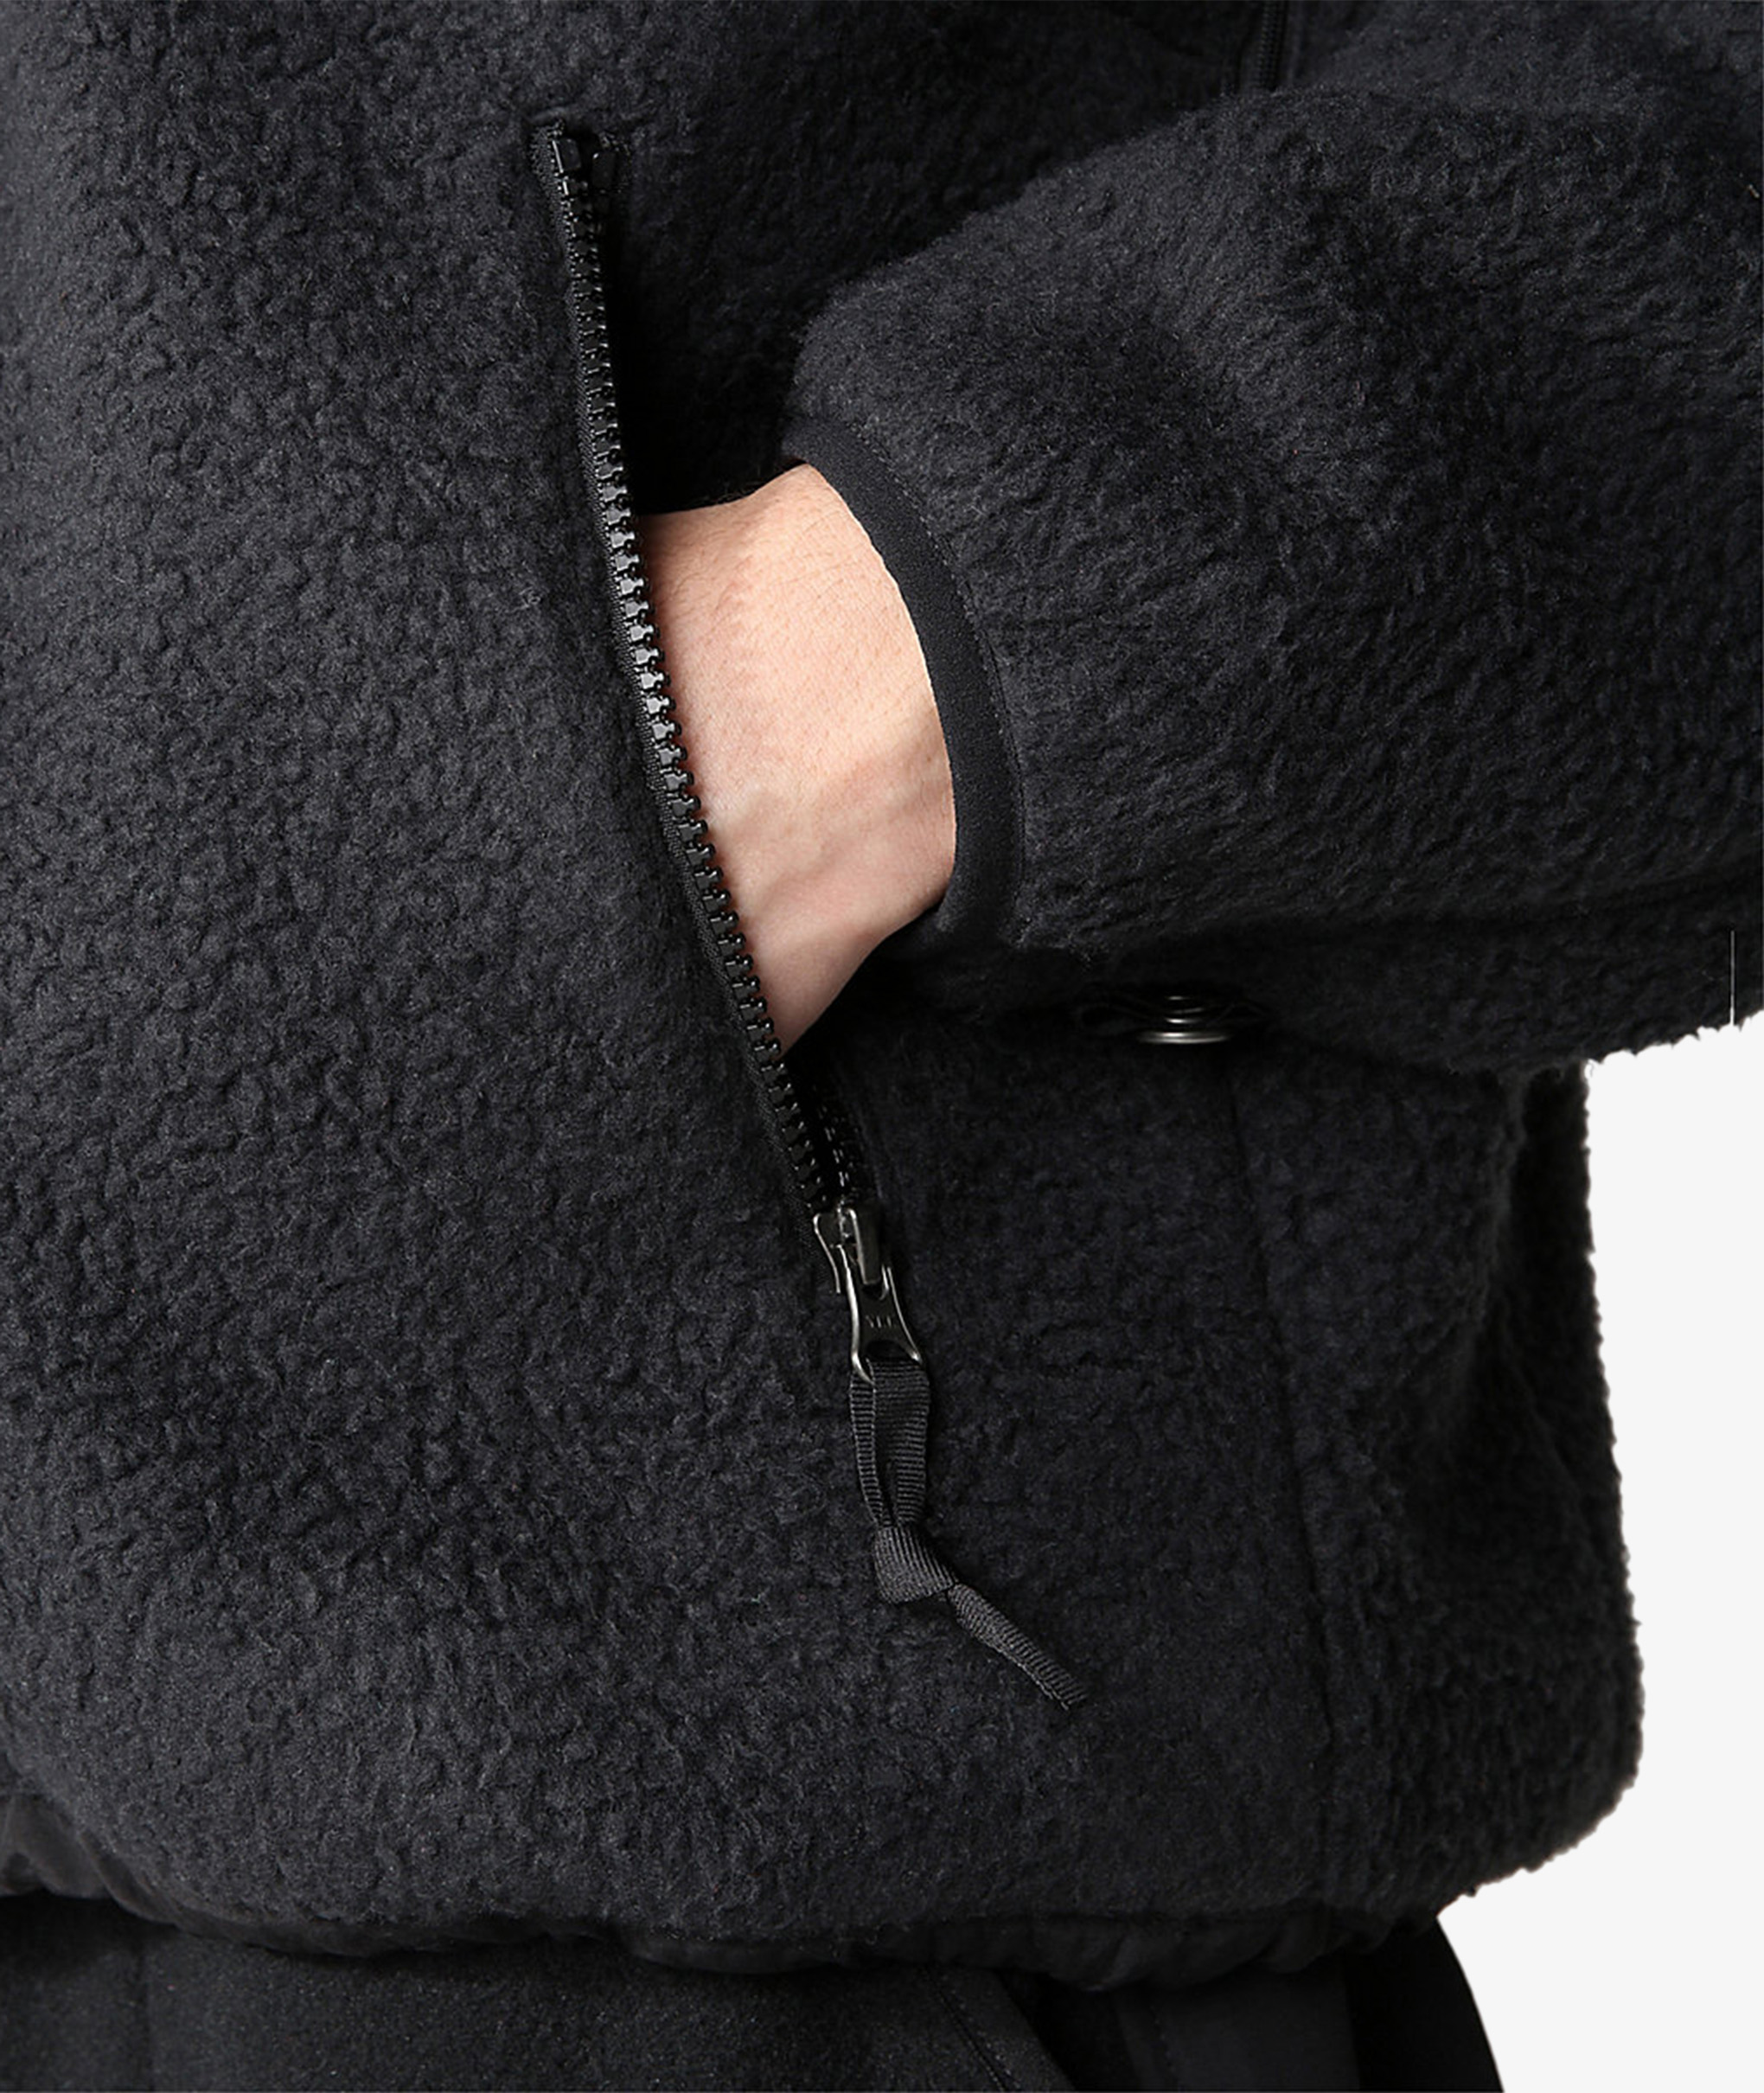 Norse Store  Shipping Worldwide - The North Face 94 HR Denali Jacket -  Black